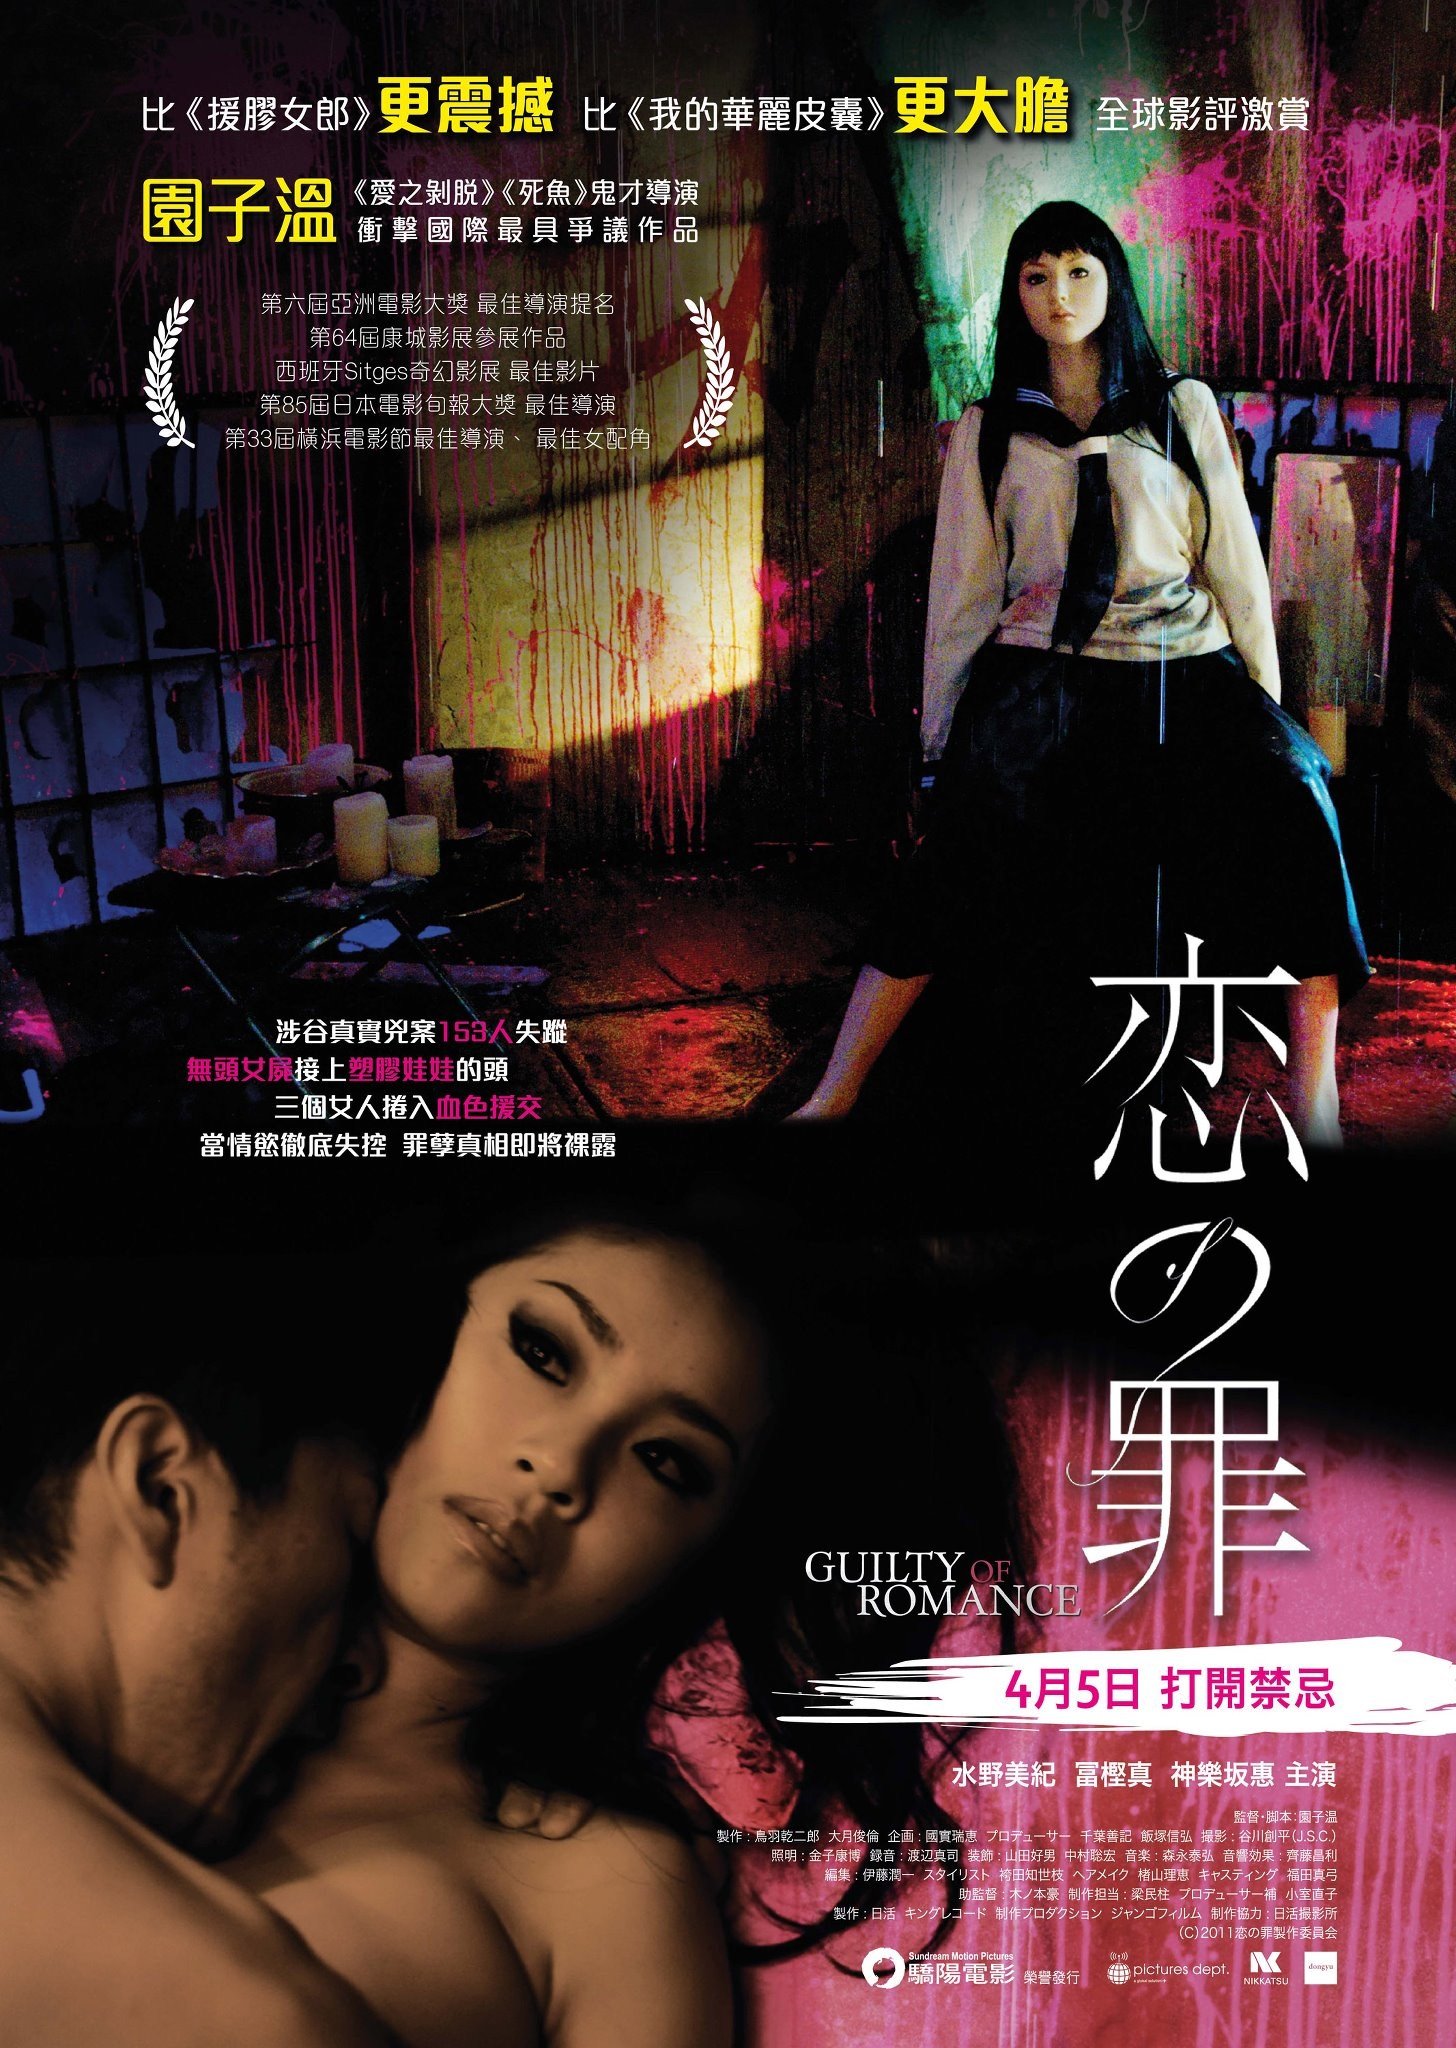 [18+] Guilty of Romance (2011)